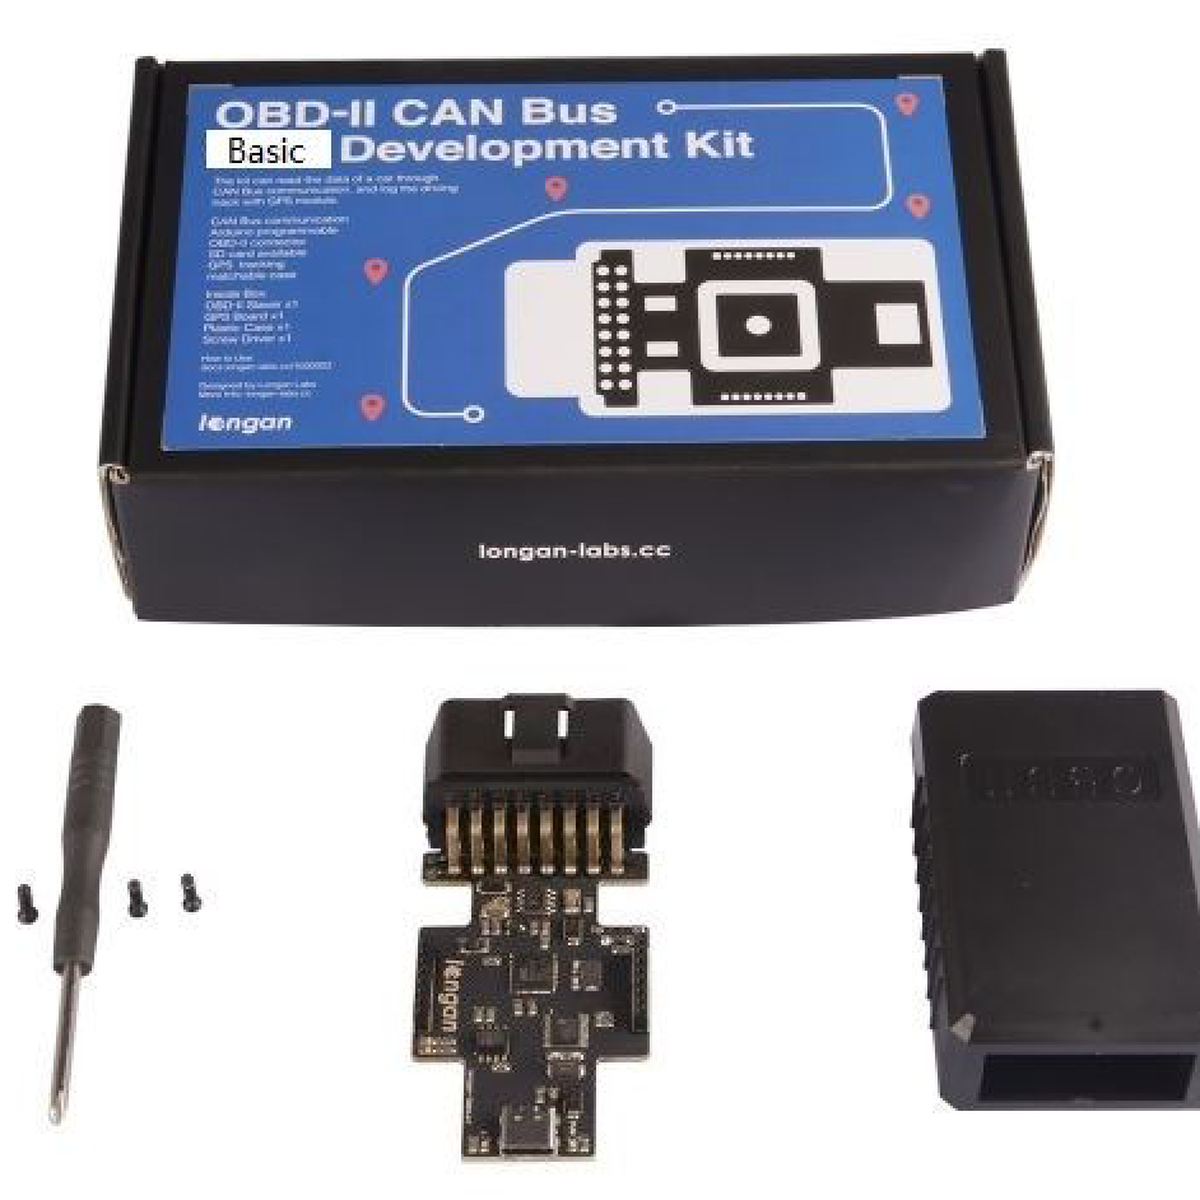 Obd Ii Can Bus Basic Development Kit From Martinchong On Tindie